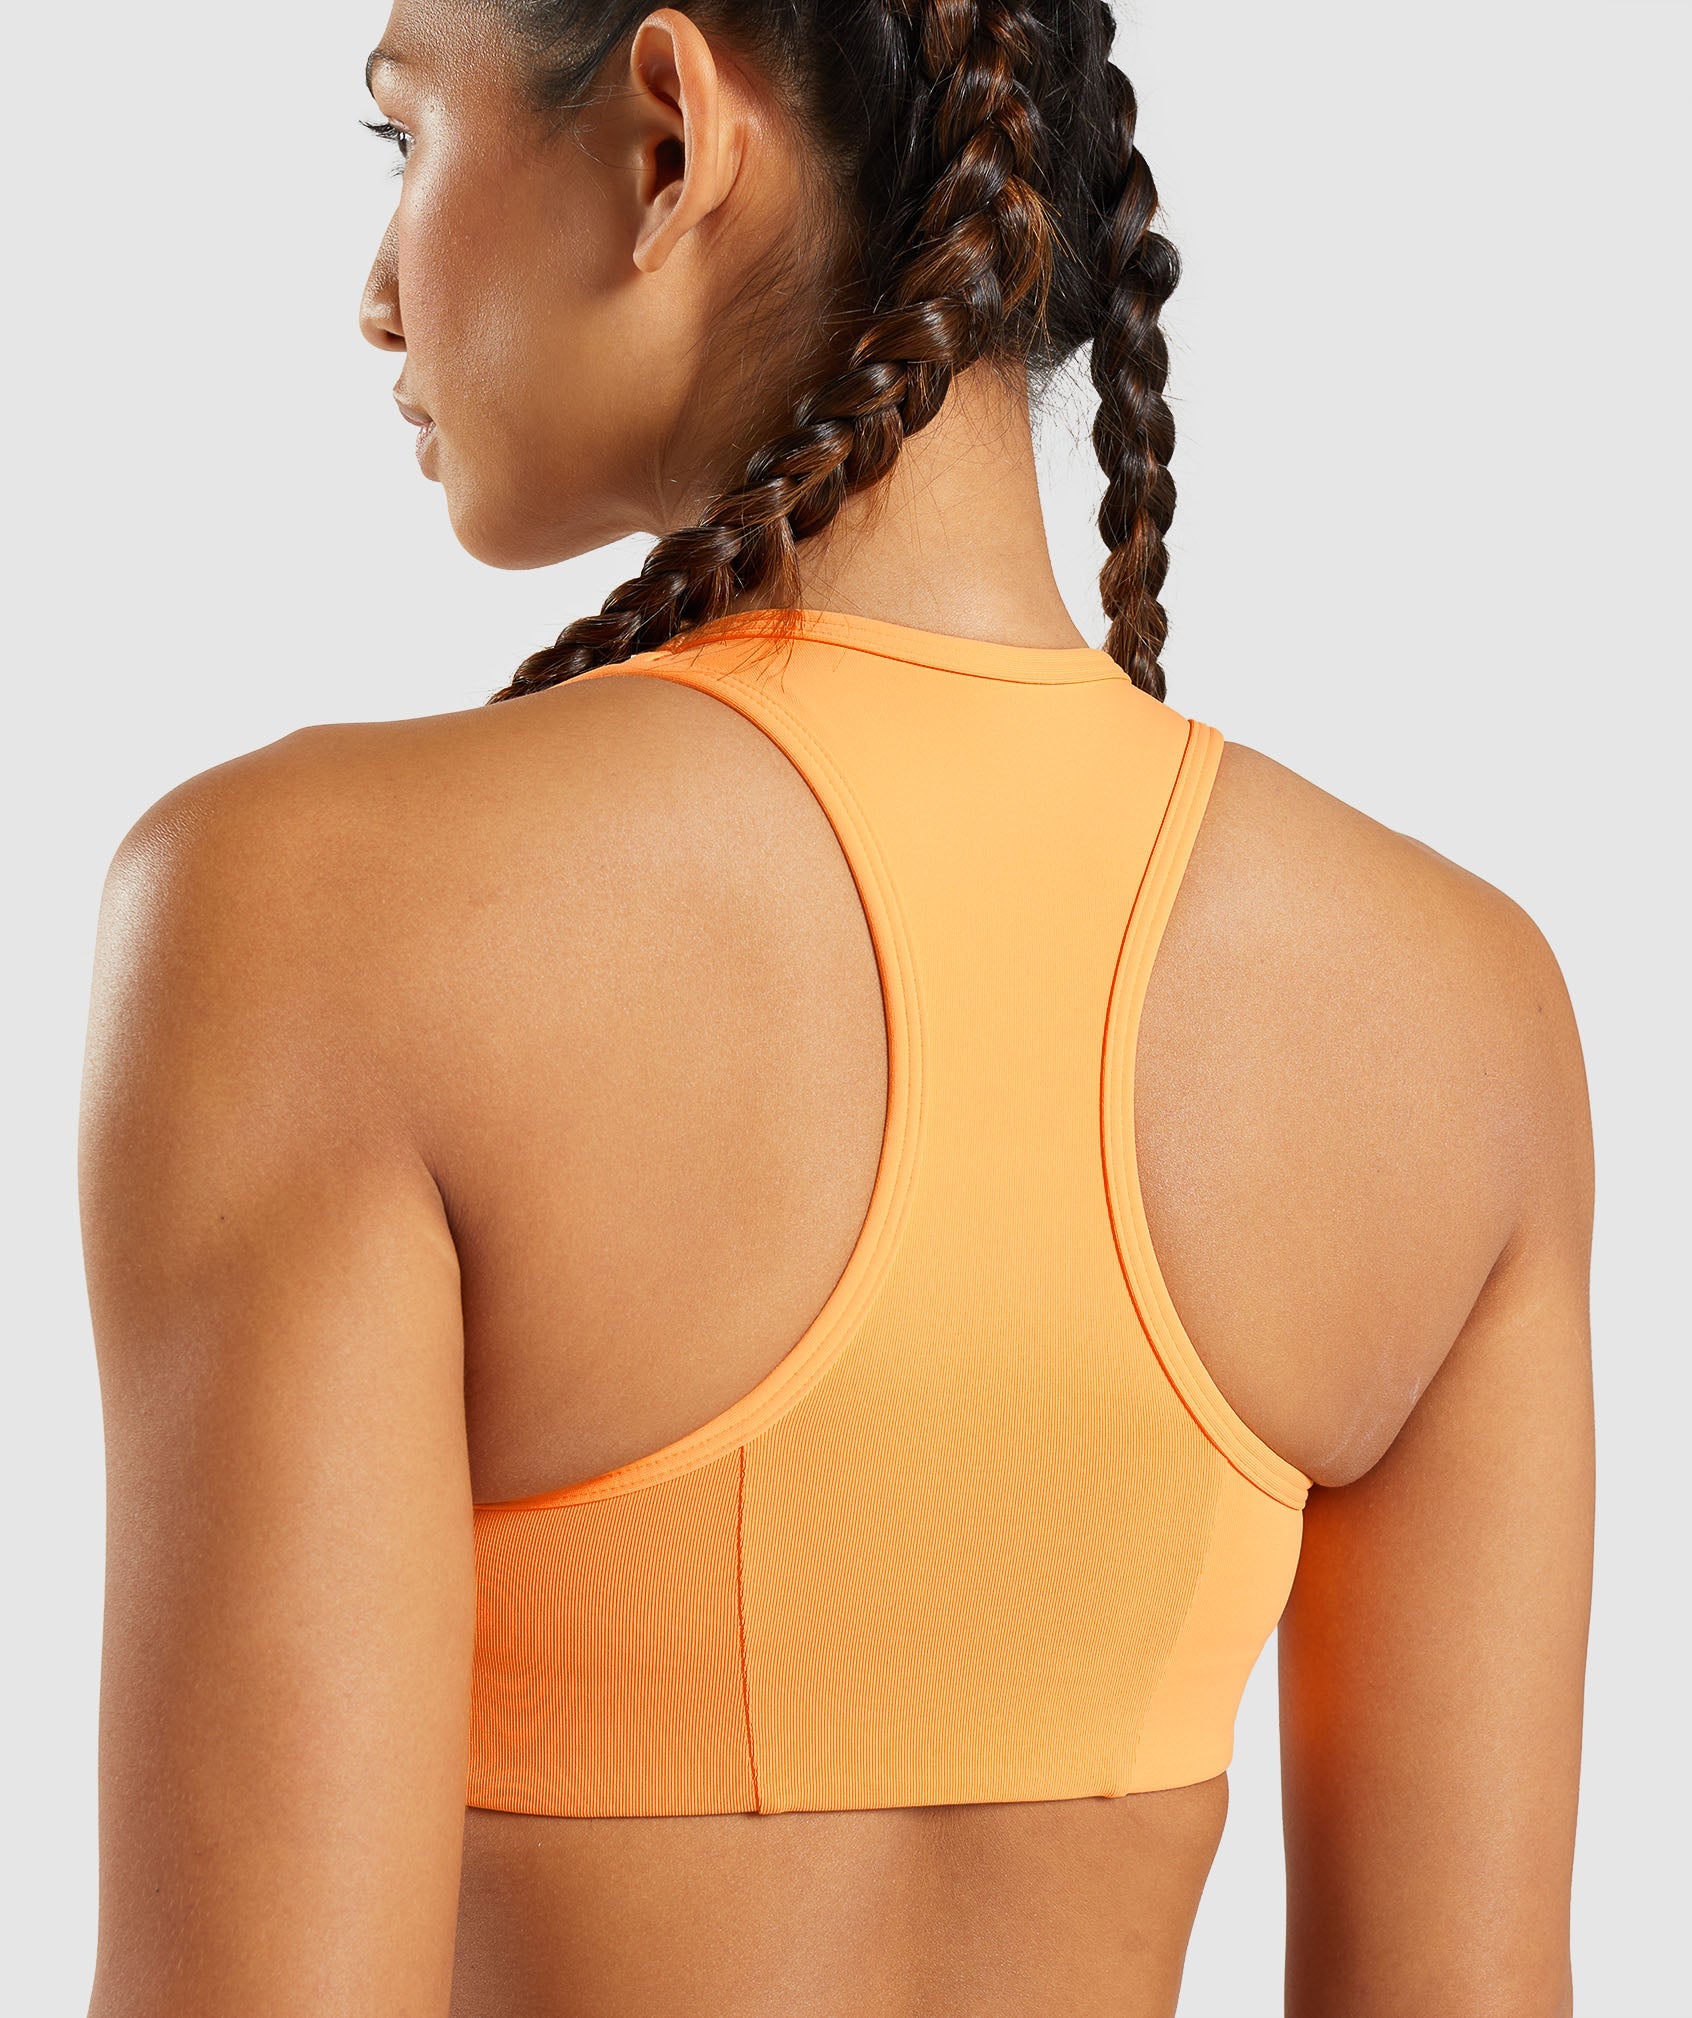 Essential Racer Back Sports Bra in Apricot Orange - view 5